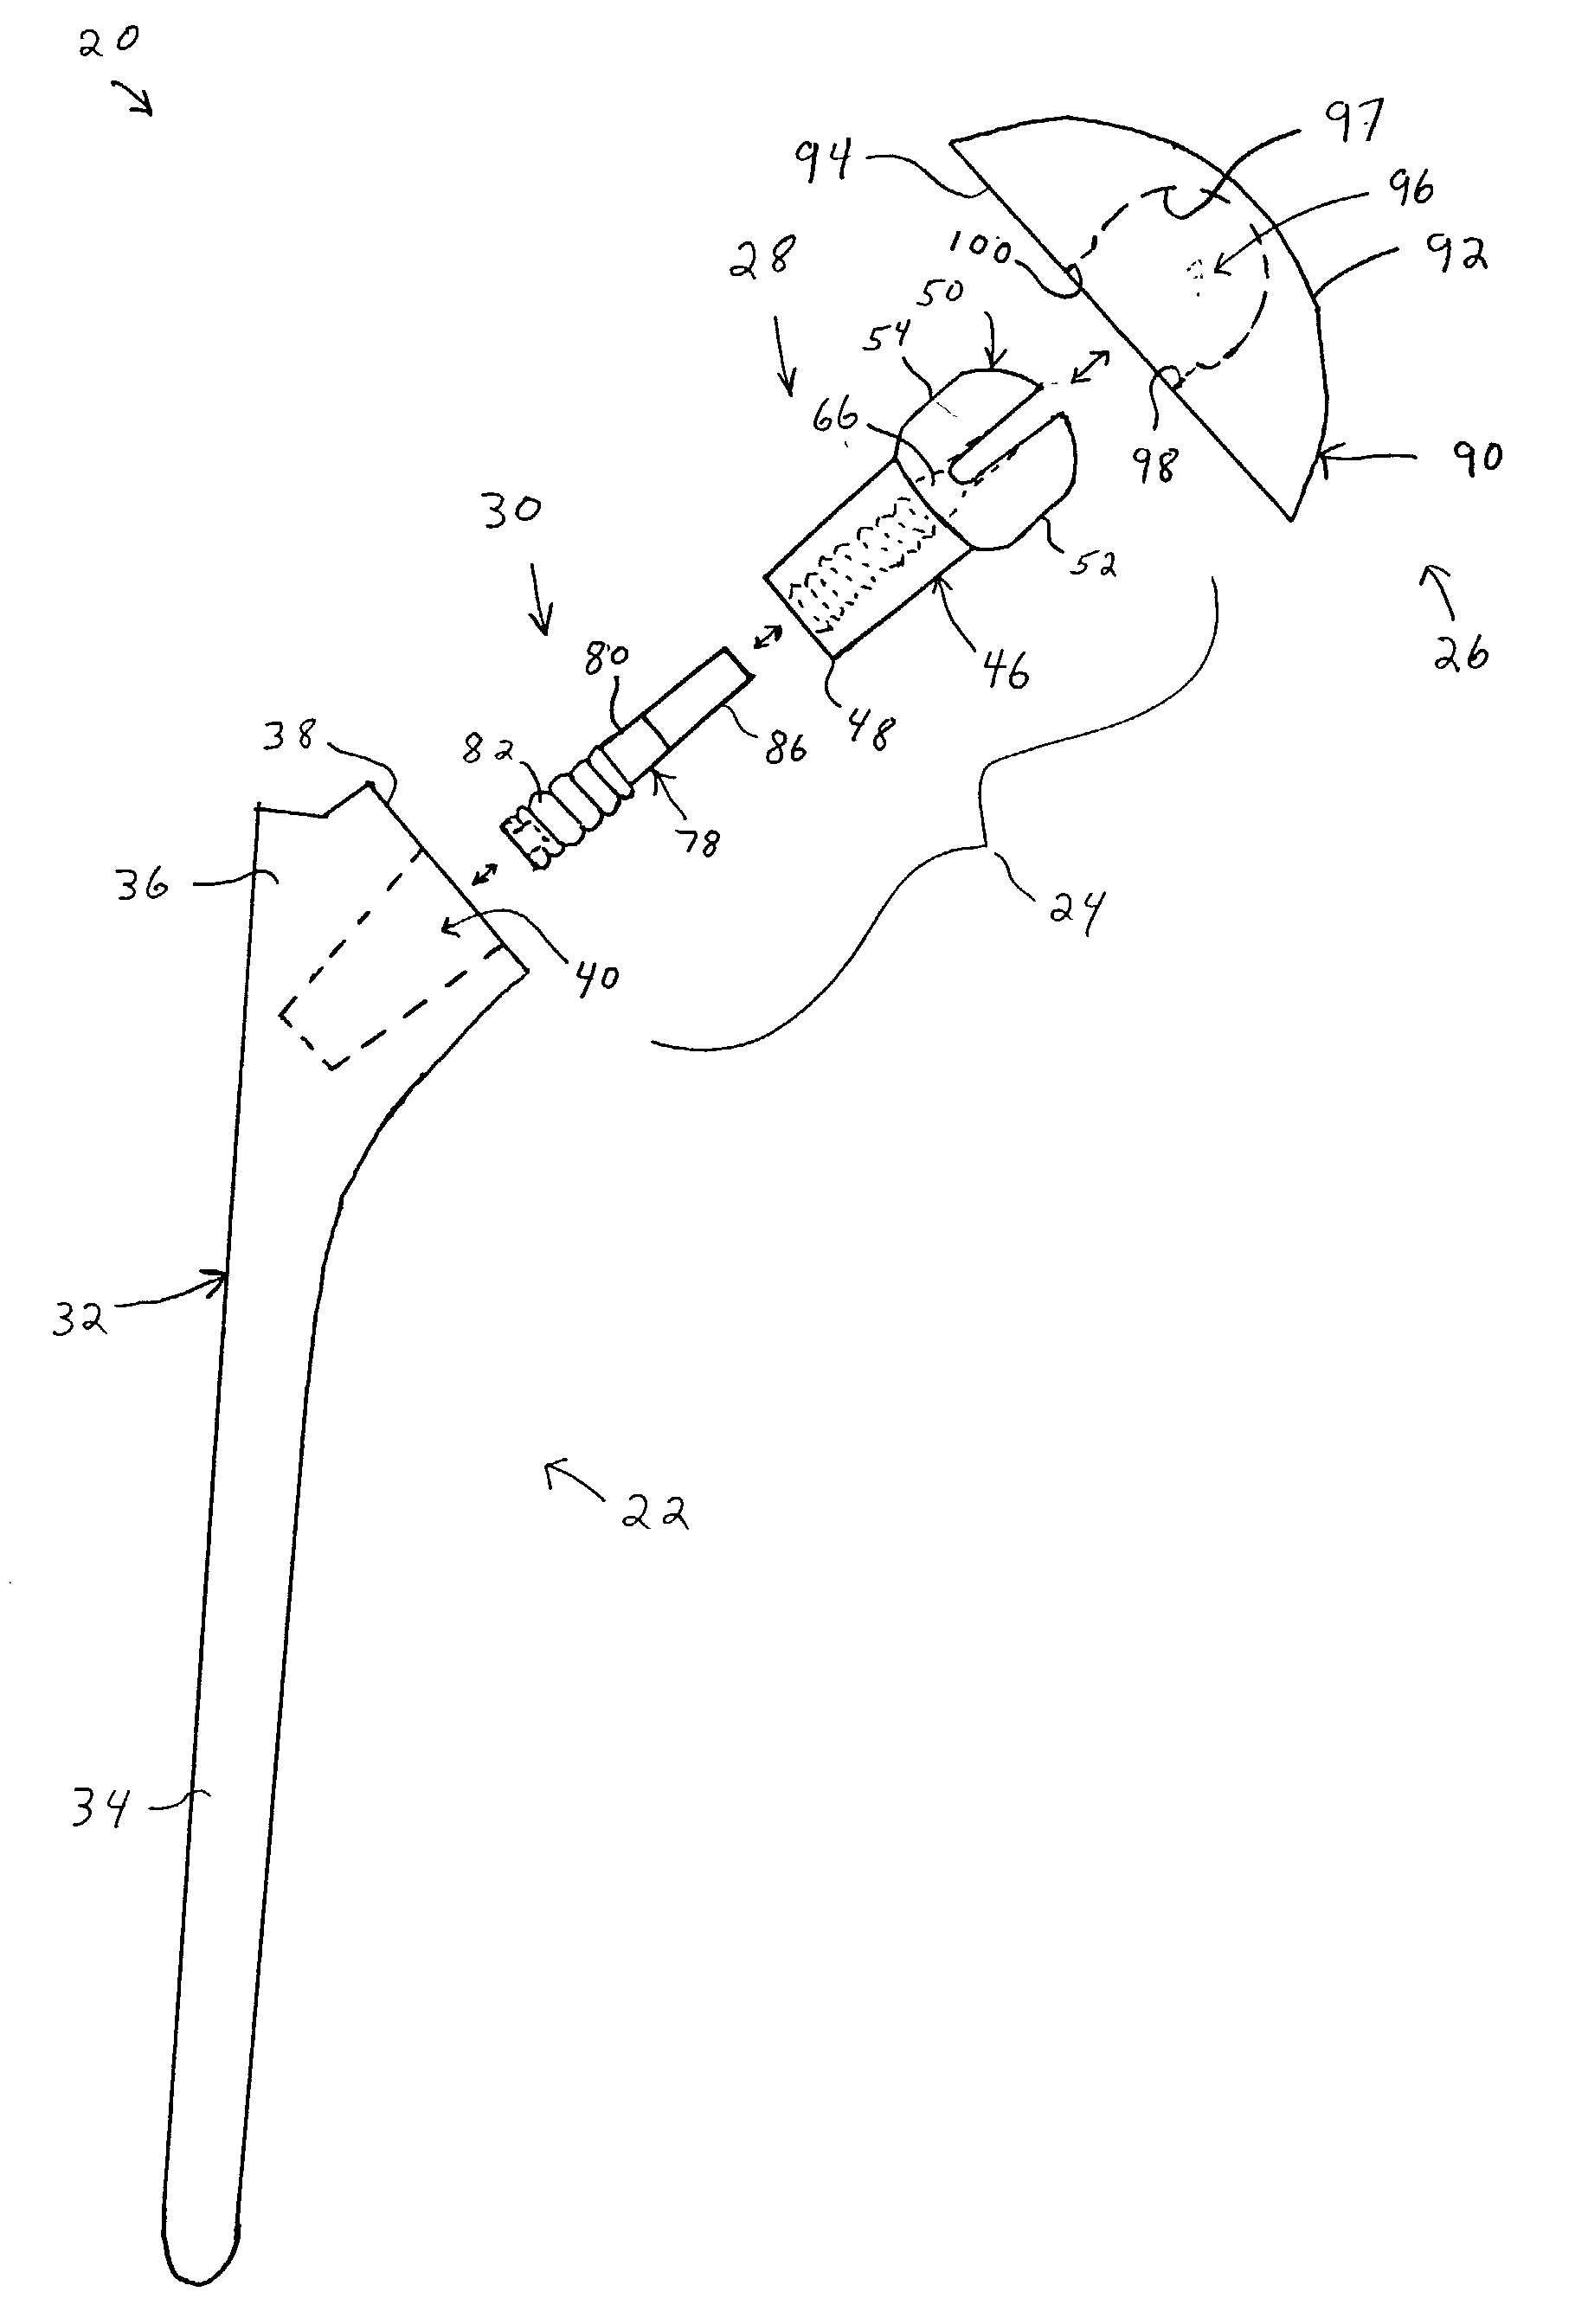 Shoulder prosthesis having a removable conjoining component coupling a humeral component and humeral head and providing infinitely adjustable positioning of an articular surface of the humeral head